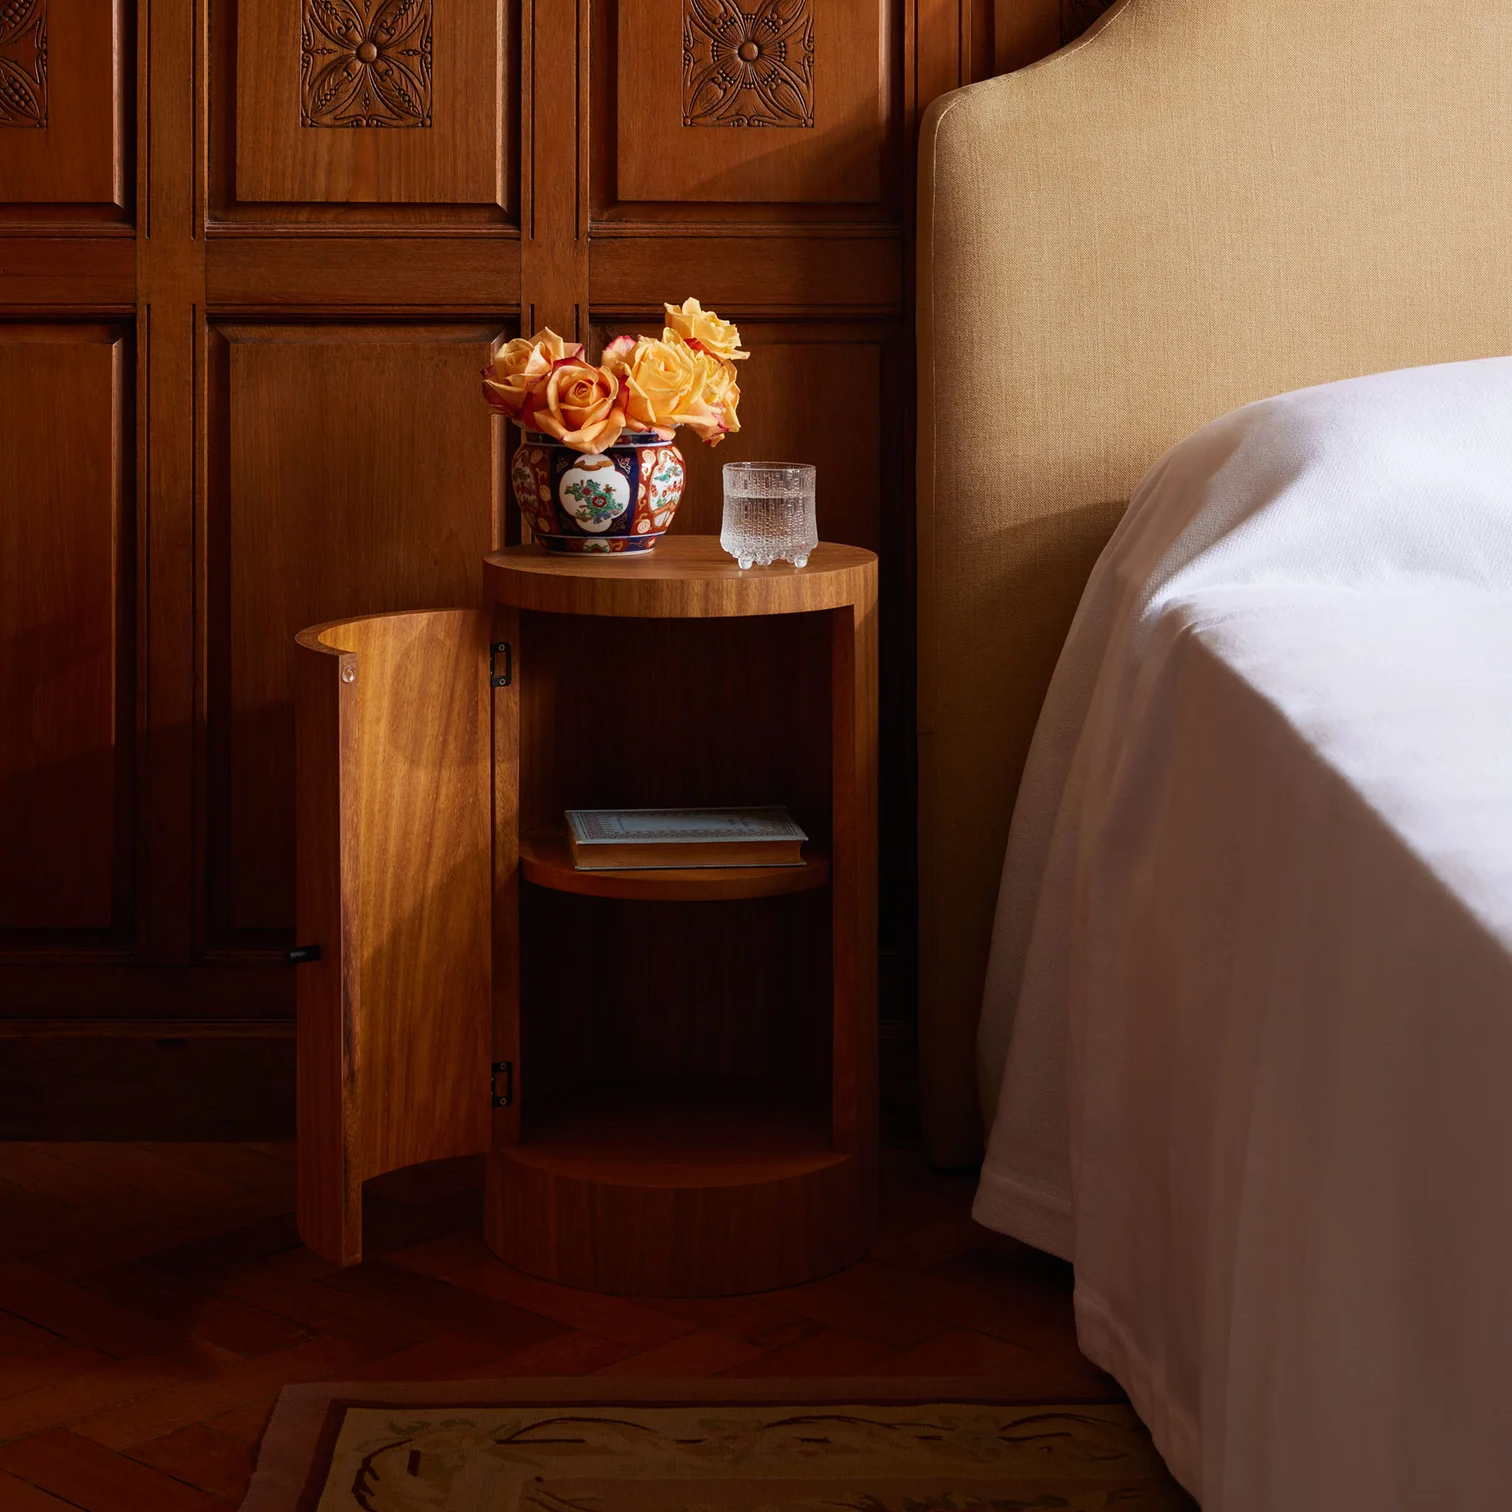 a bed with a wooden headboard and a small table with flowers on it